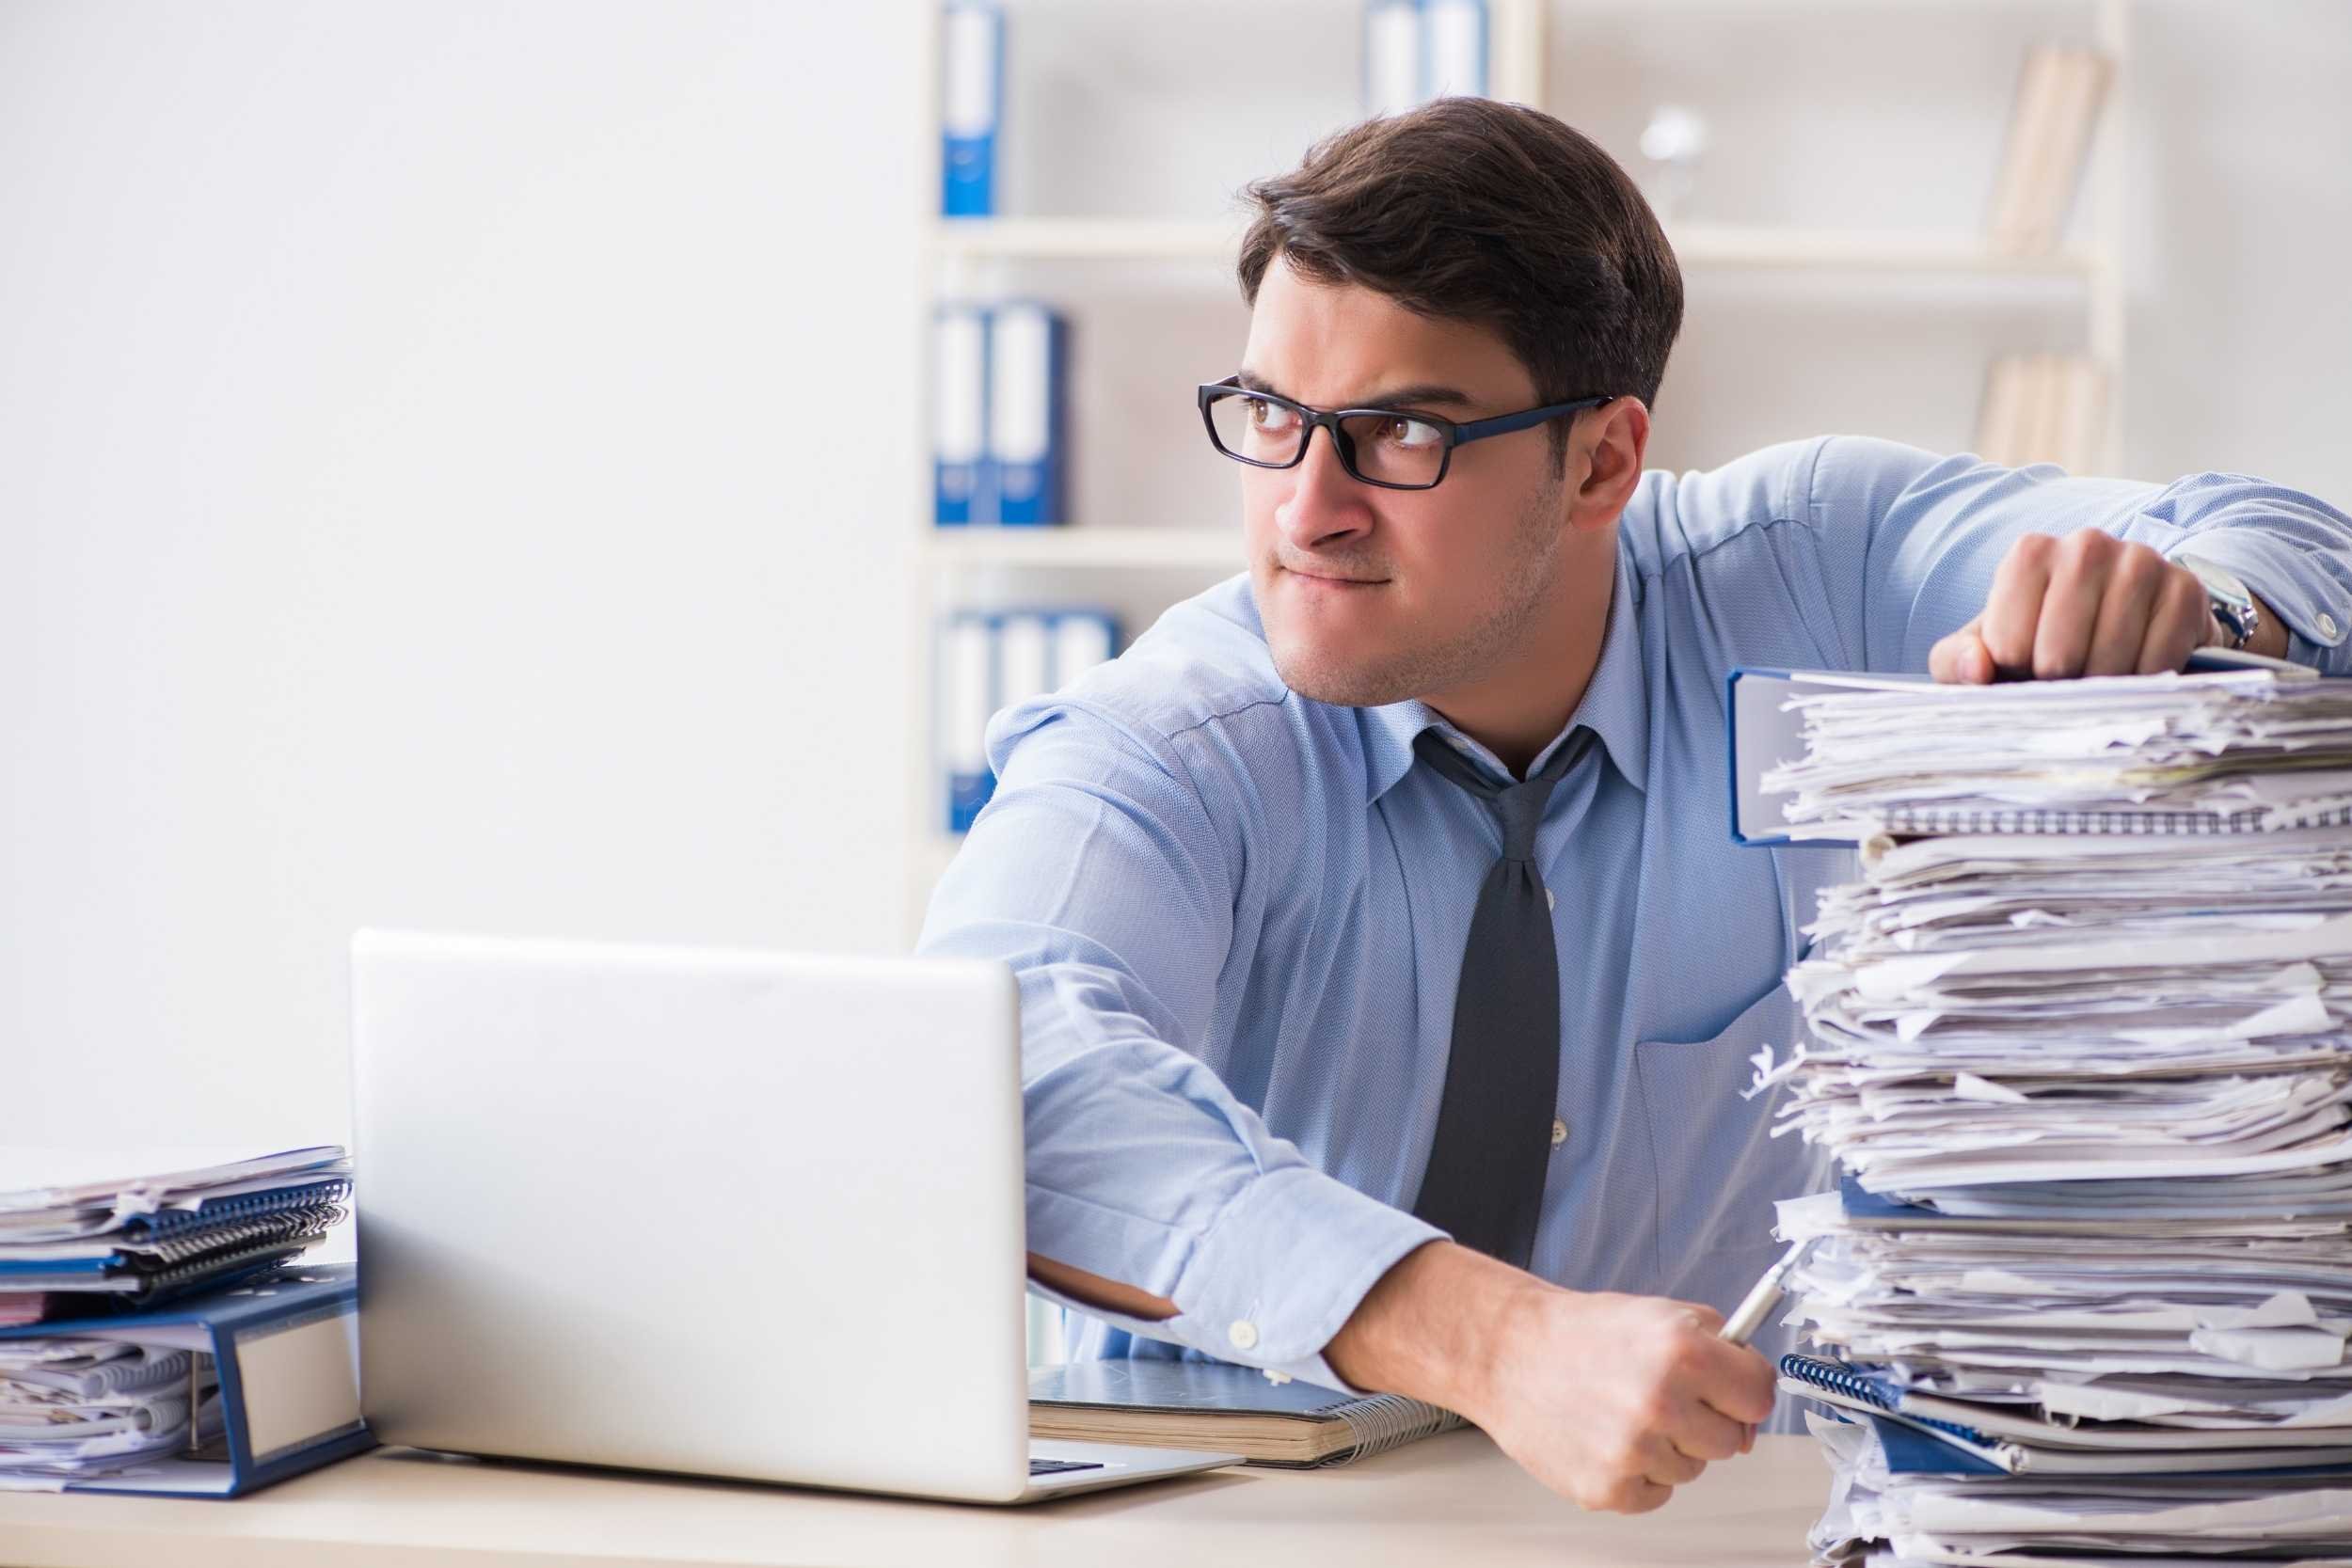 A HR Manager has piles of paperwork in front of him